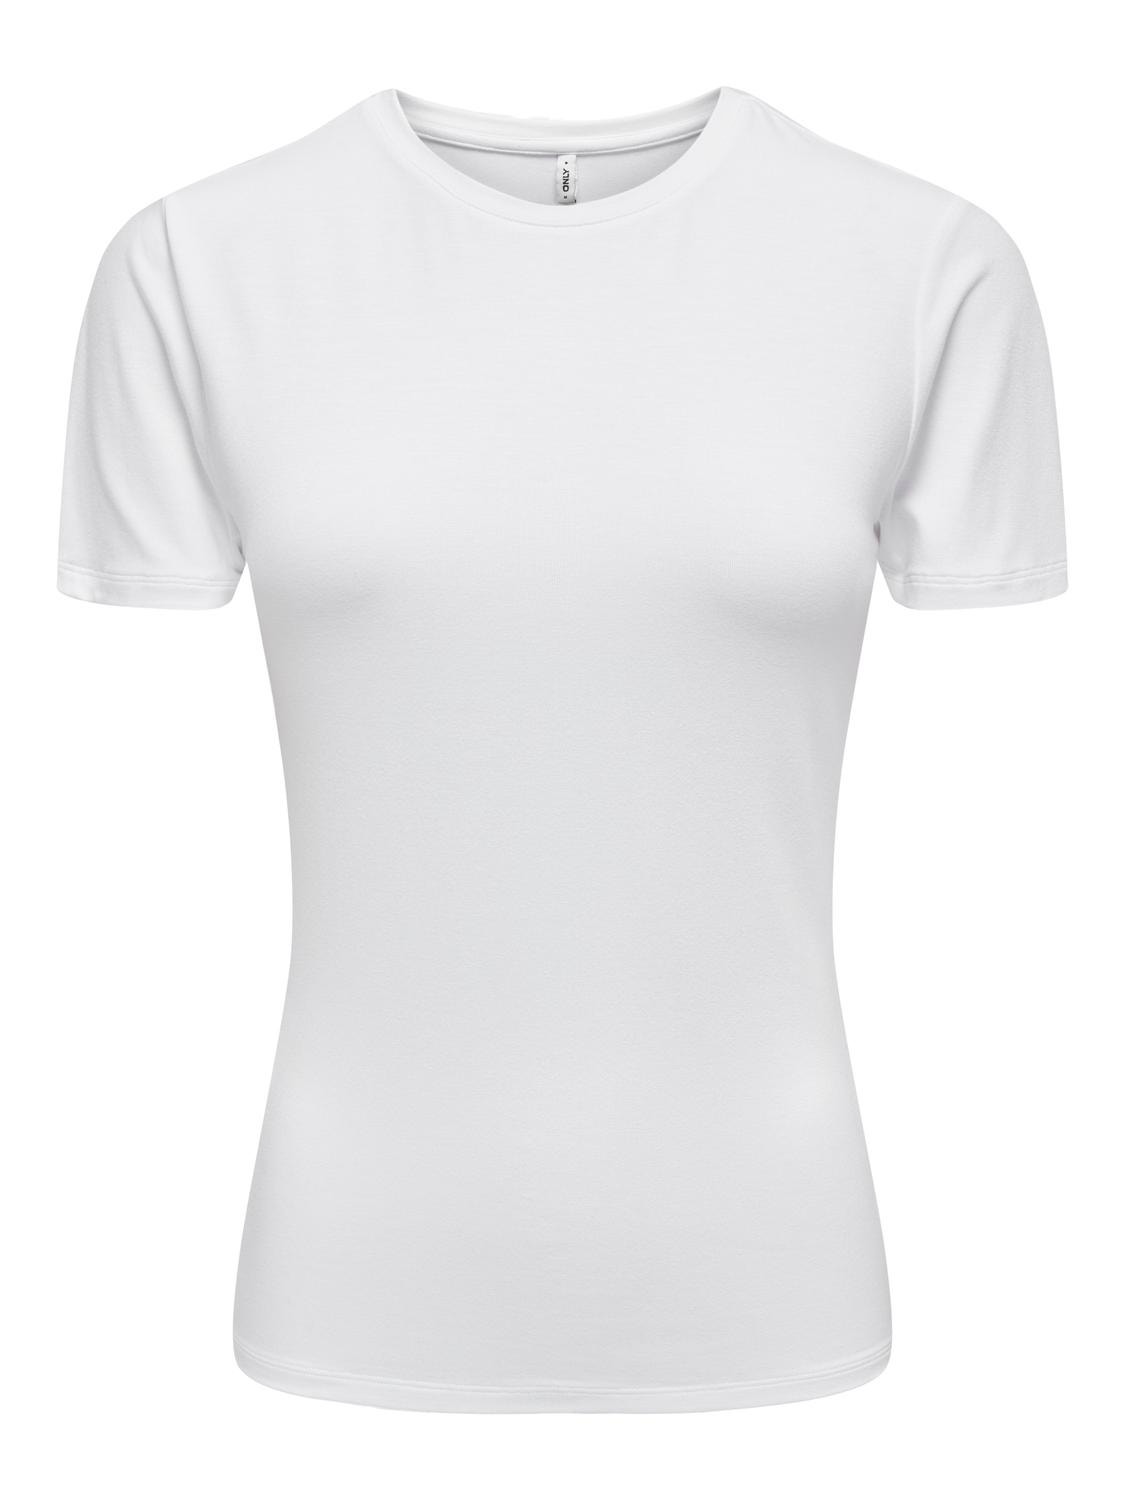 ONLY Regular Fit Round Neck Top -White - 15339569